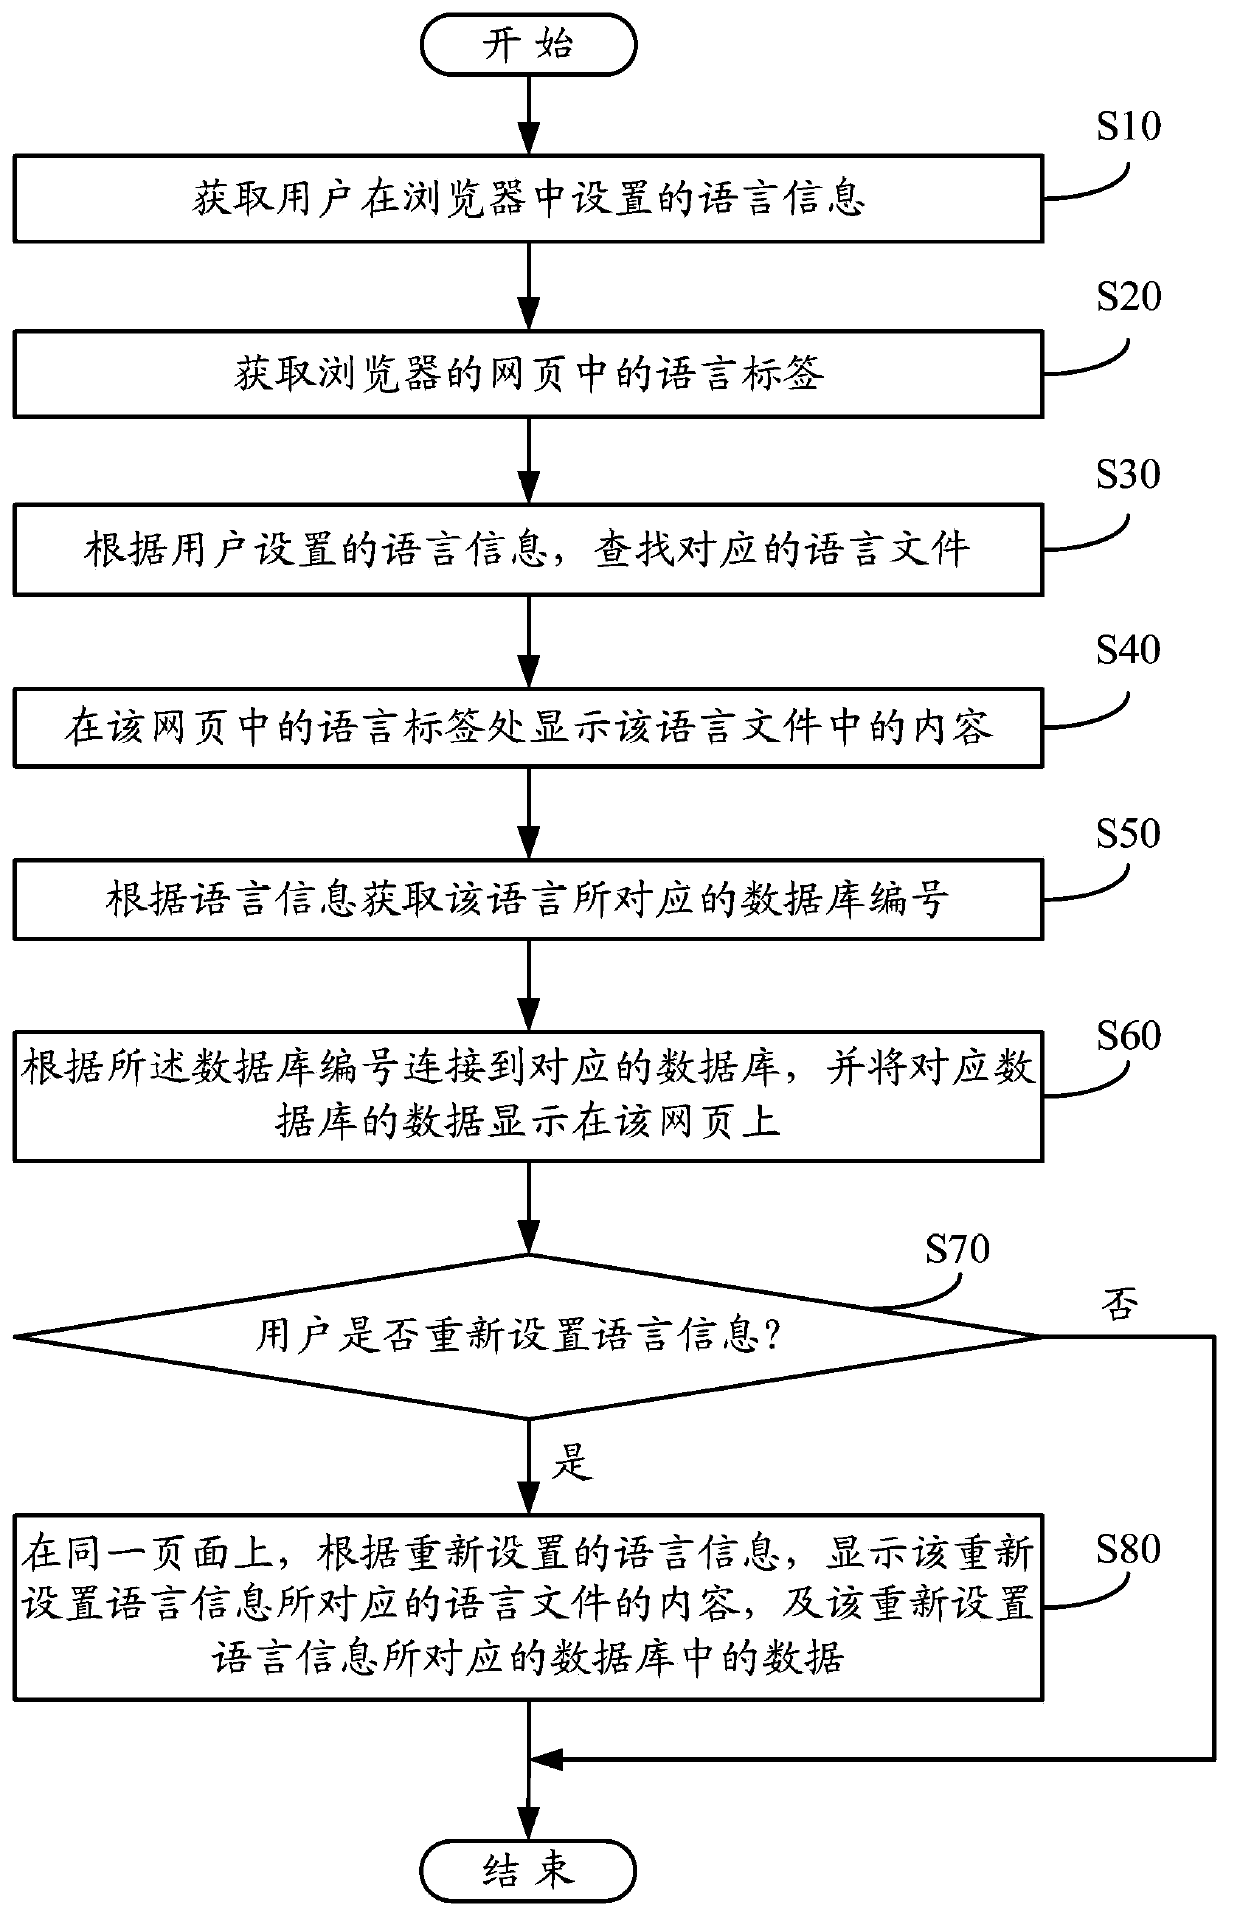 Multi-language web page converting system and method